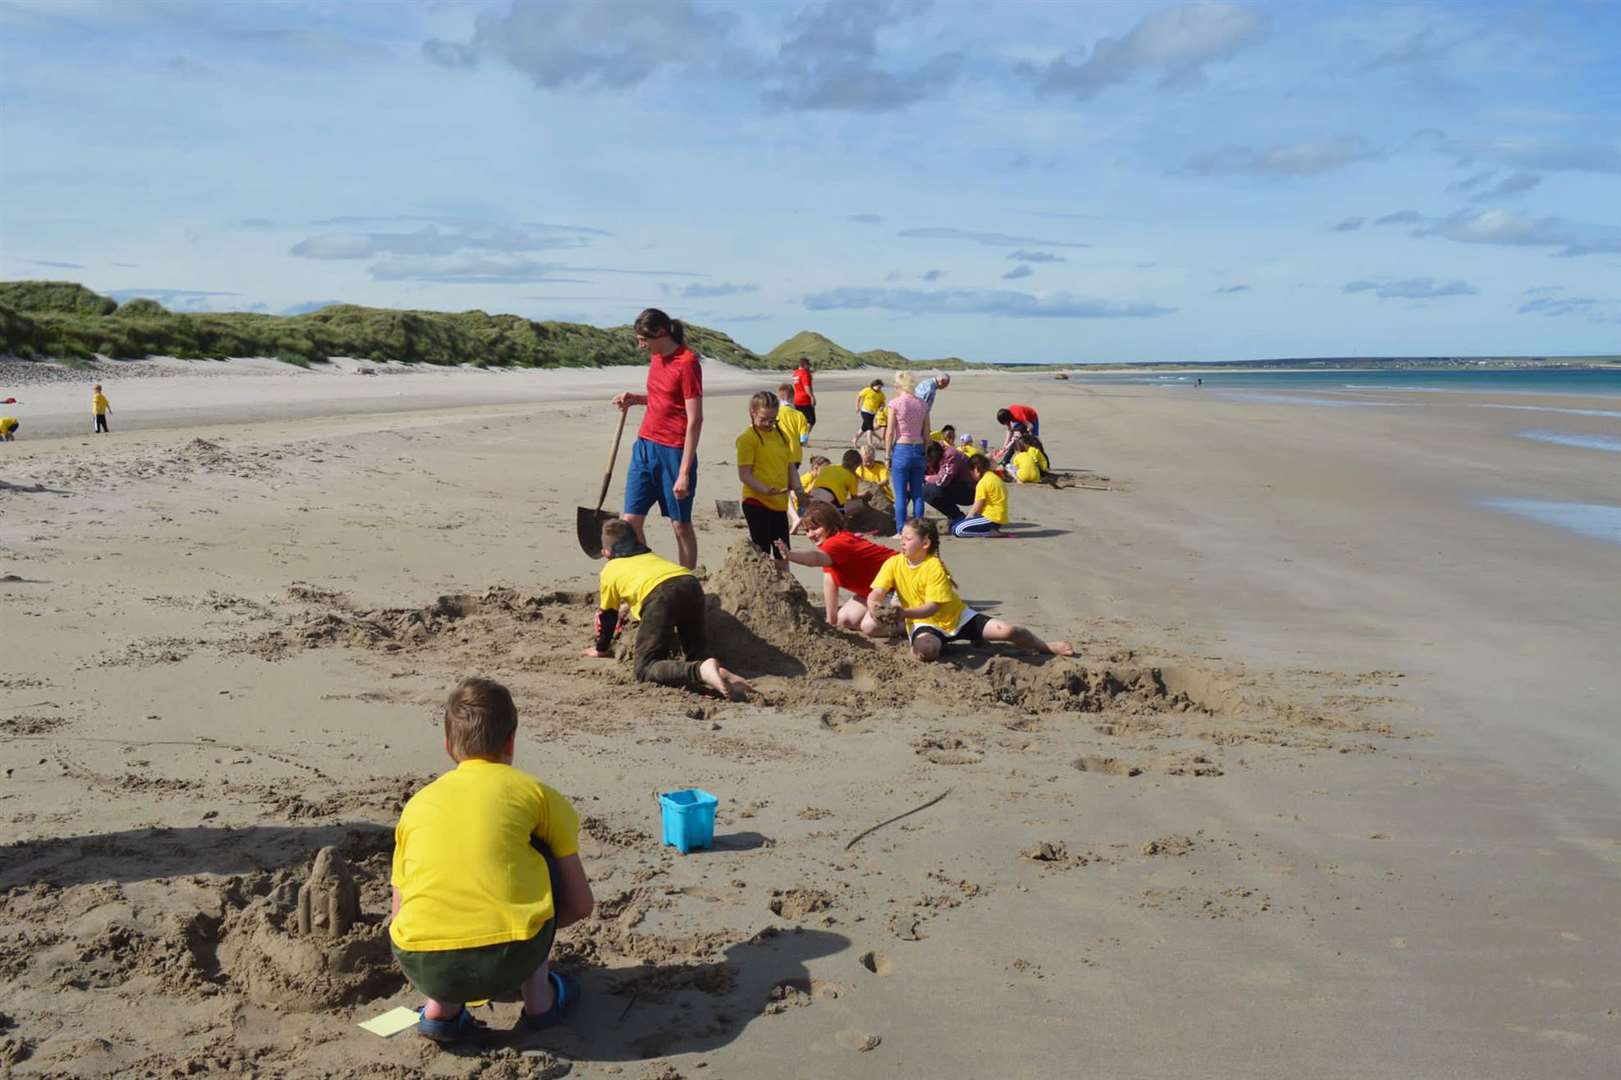 Sand sculptures taking shape during the beach outing in Reiss.